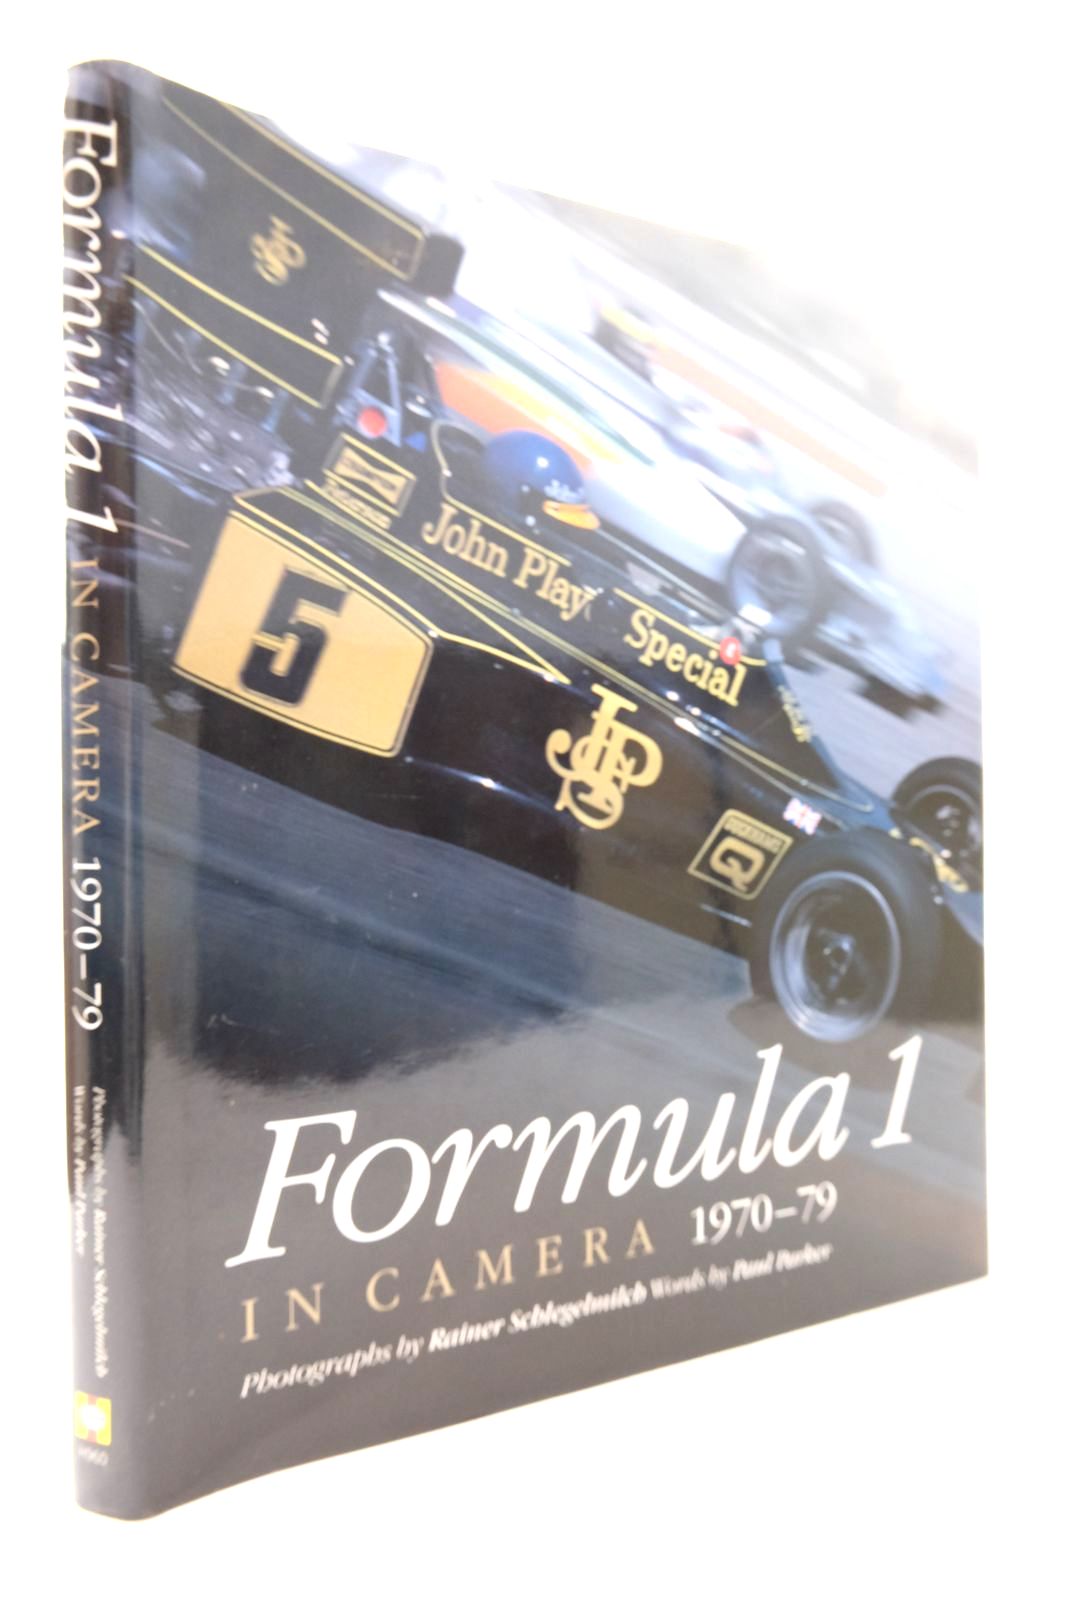 Photo of FORMULA 1 IN CAMERA 1970-79 written by Parker, Paul published by Haynes (STOCK CODE: 2133359)  for sale by Stella & Rose's Books